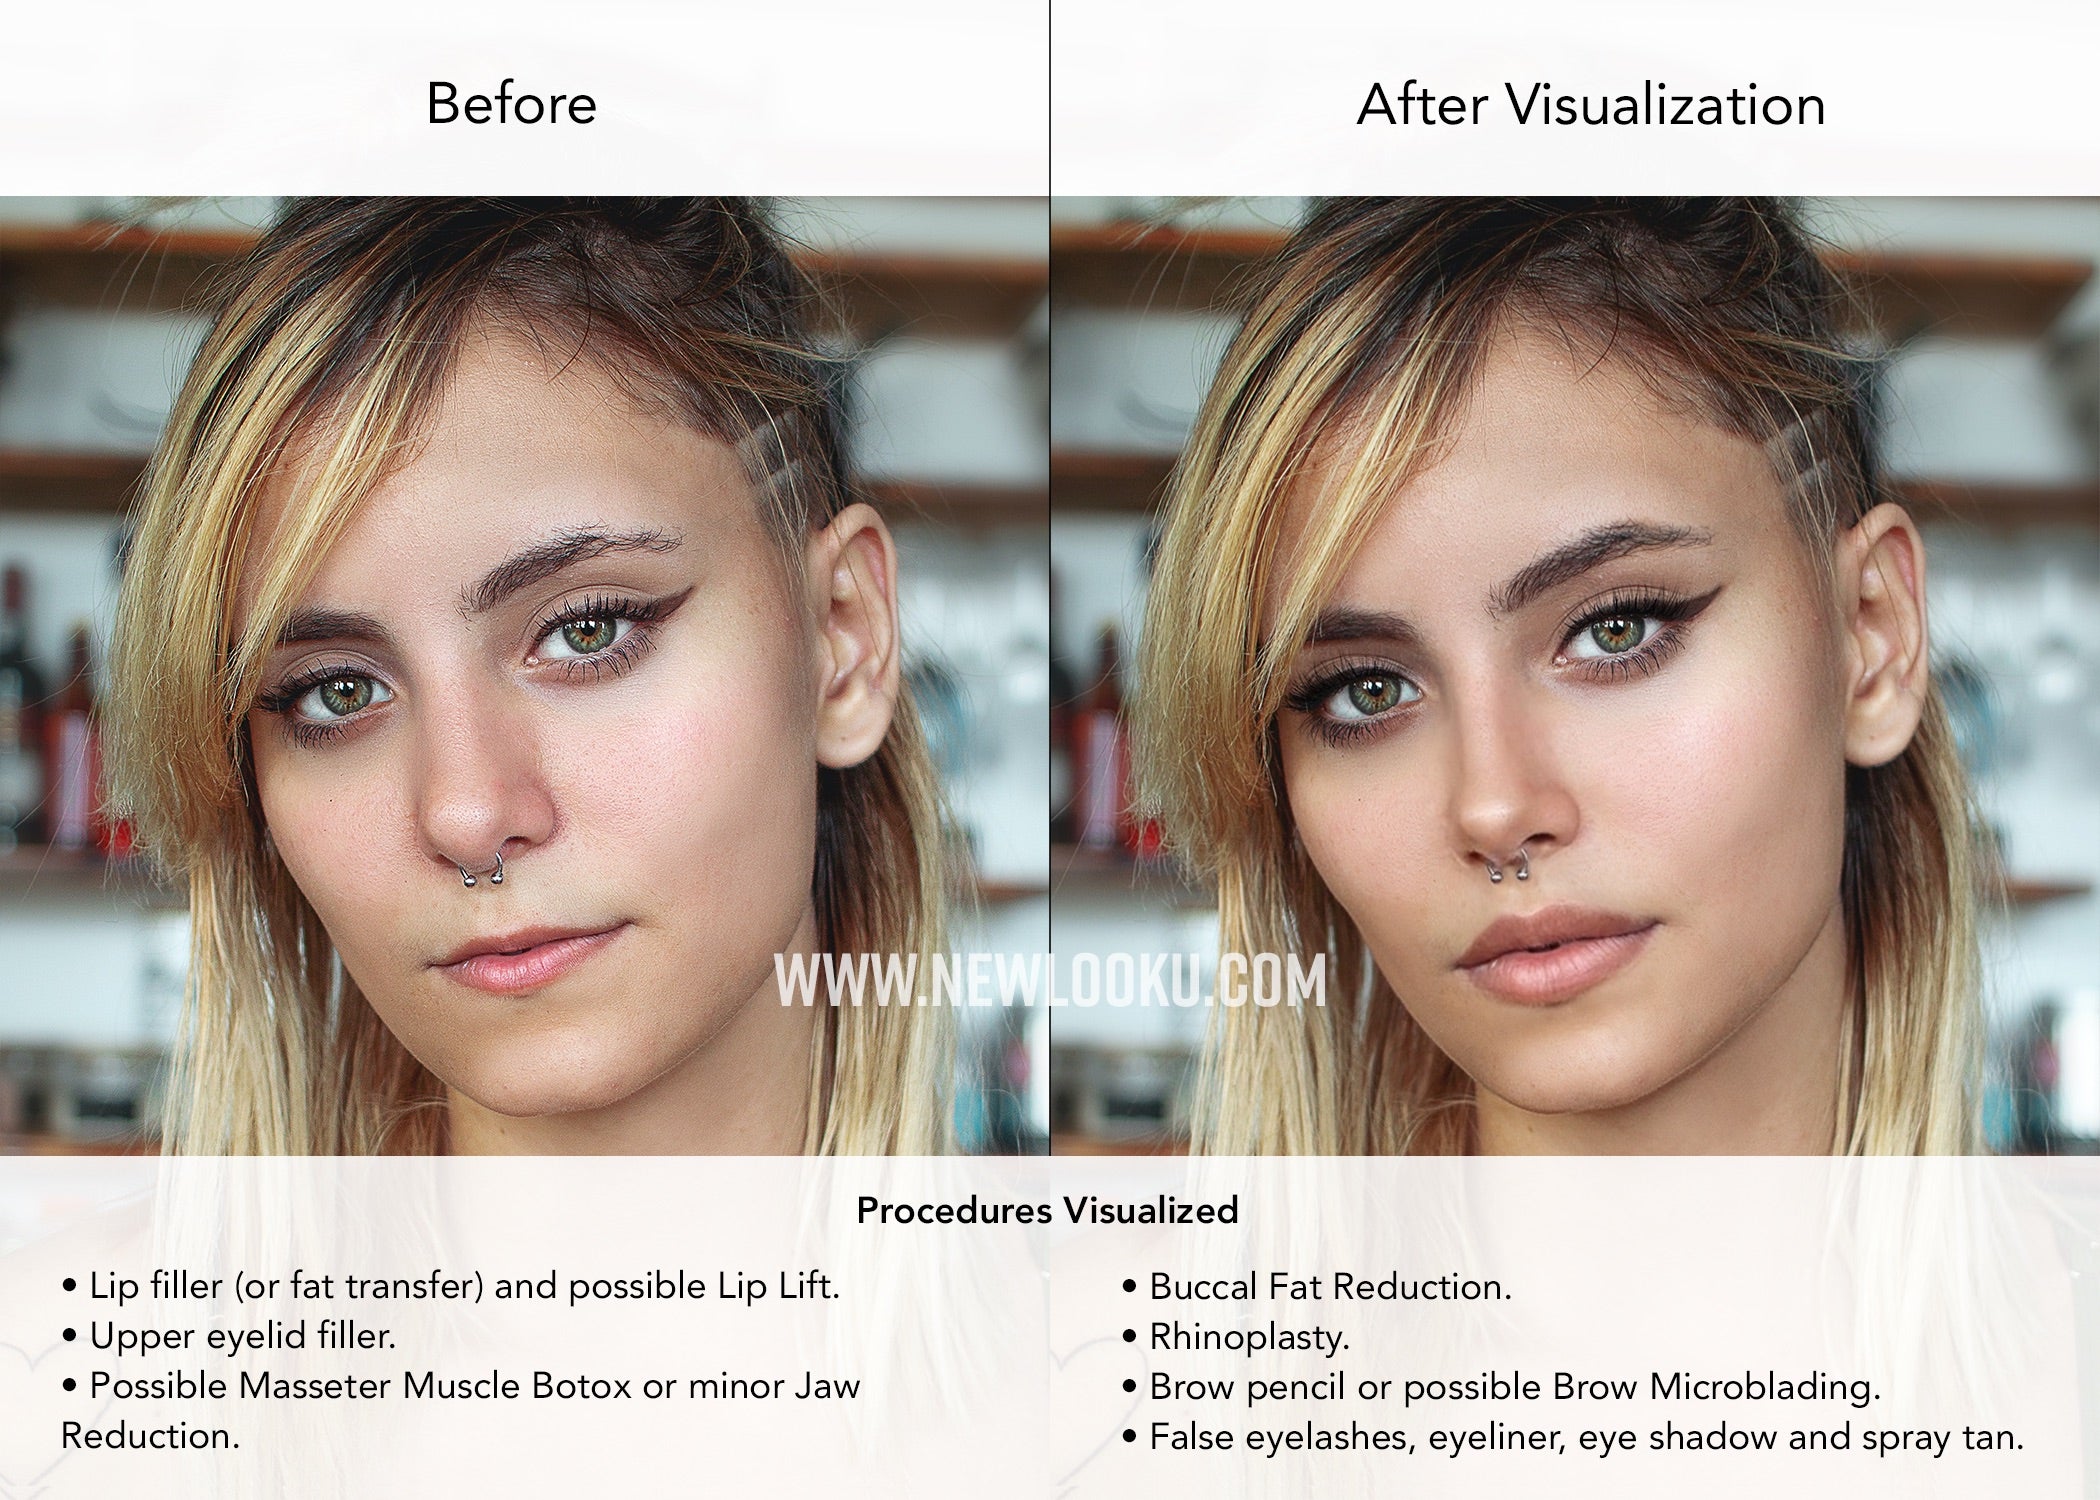 Young Woman Plastic Surgery Visualization Before & After Photo.